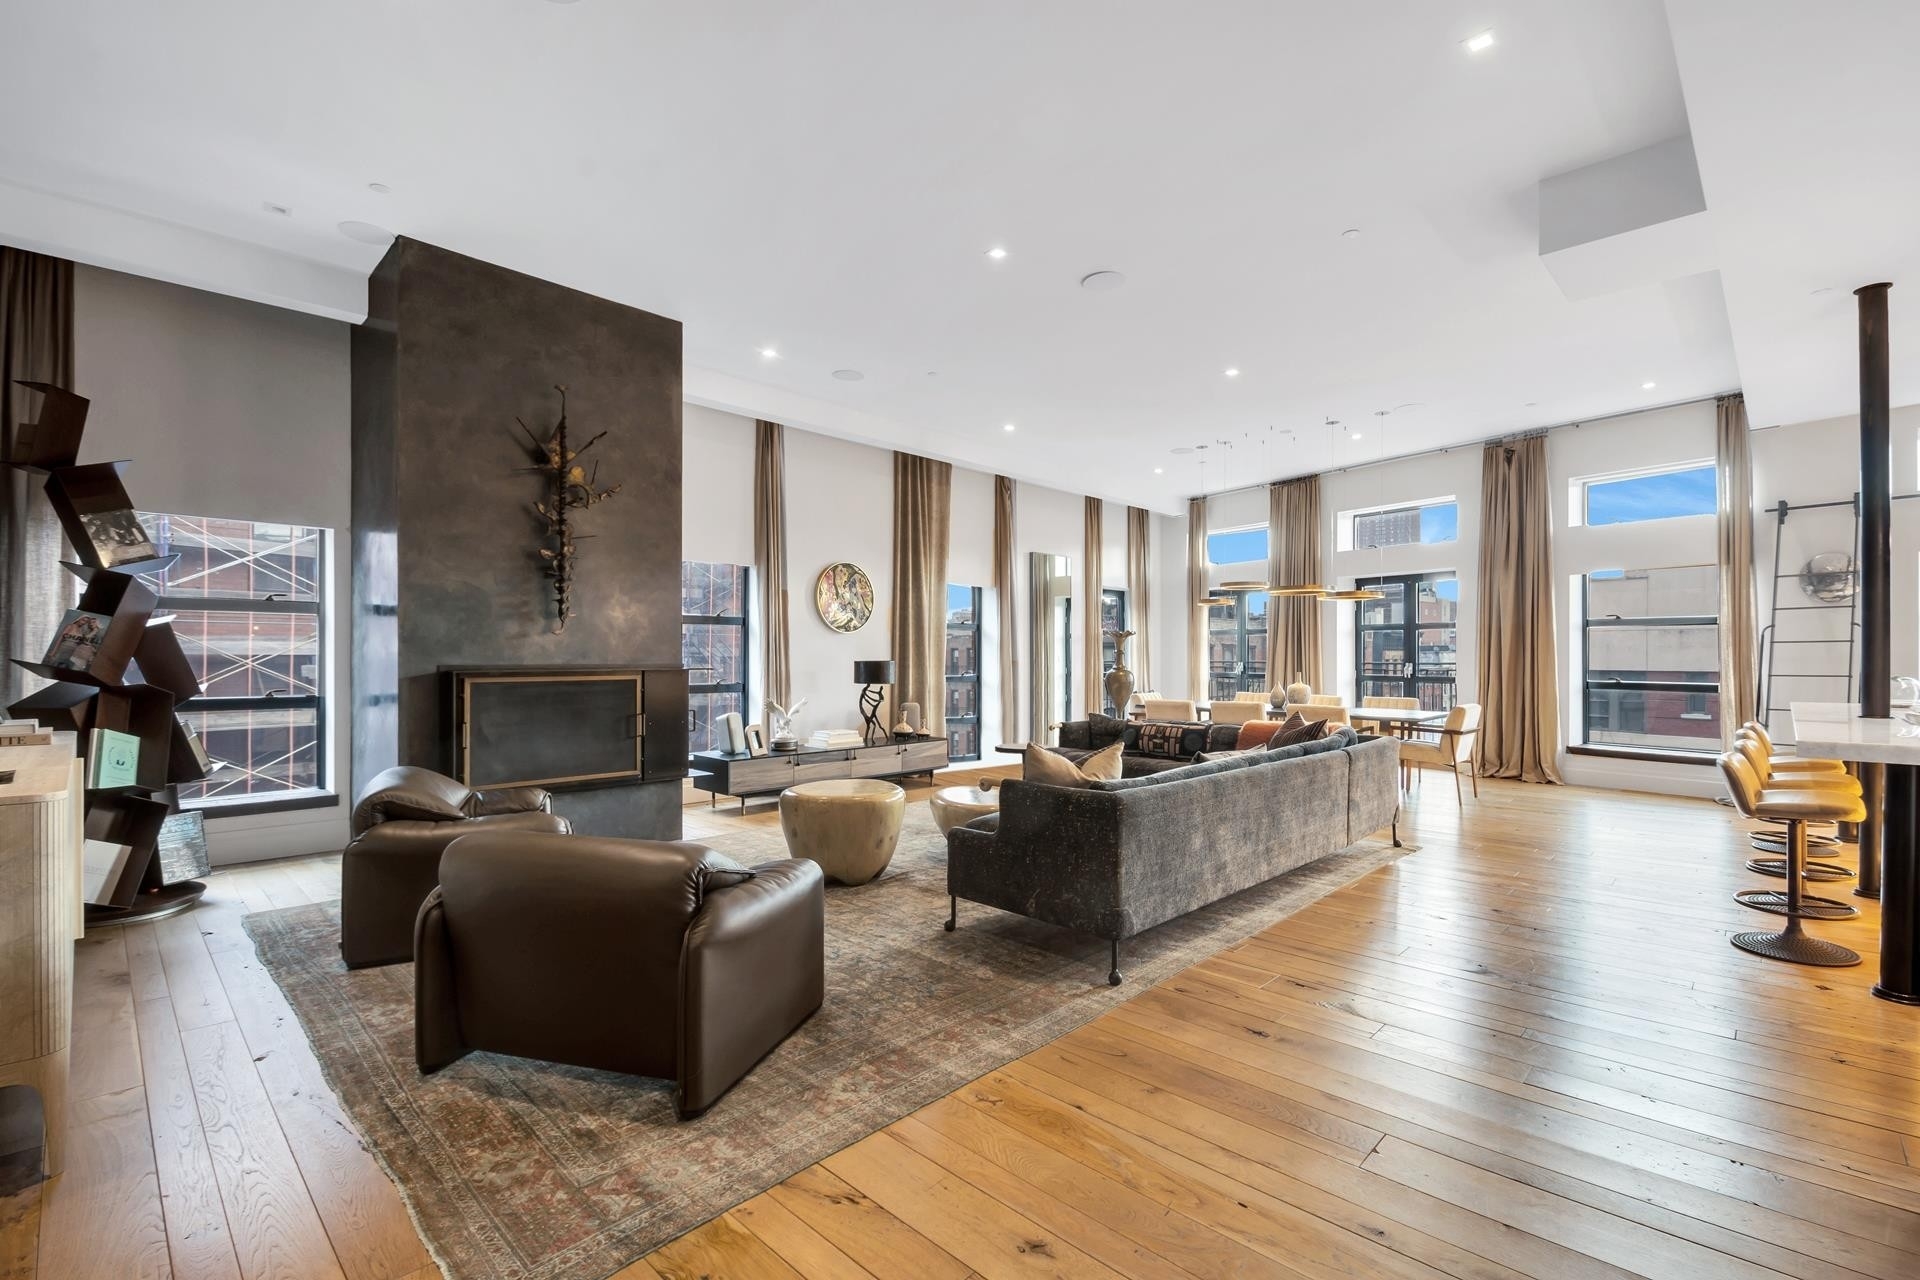 Condominium for Sale at Brewster Carriage House, 374 BROOME ST , PHS NoLIta, New York, New York 10013